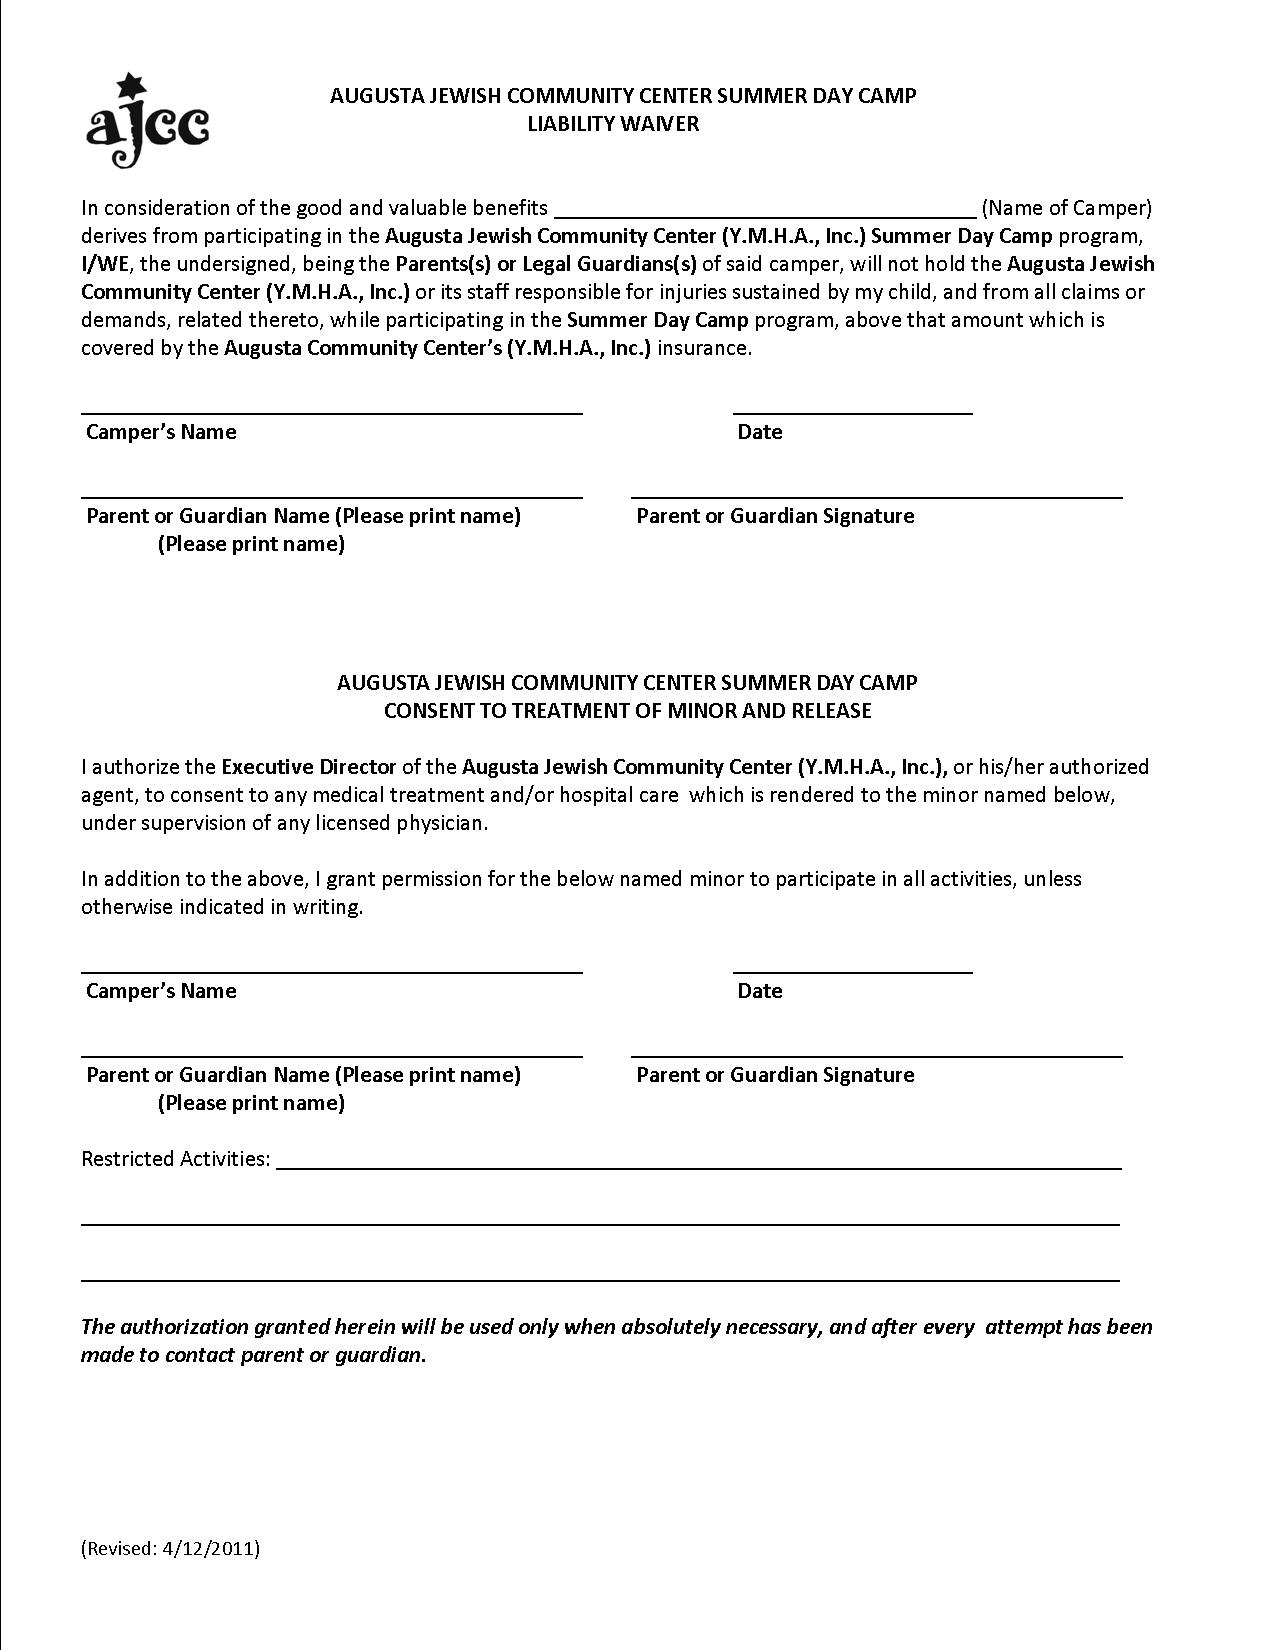 liability-release-waiver-form-free-printable-documents